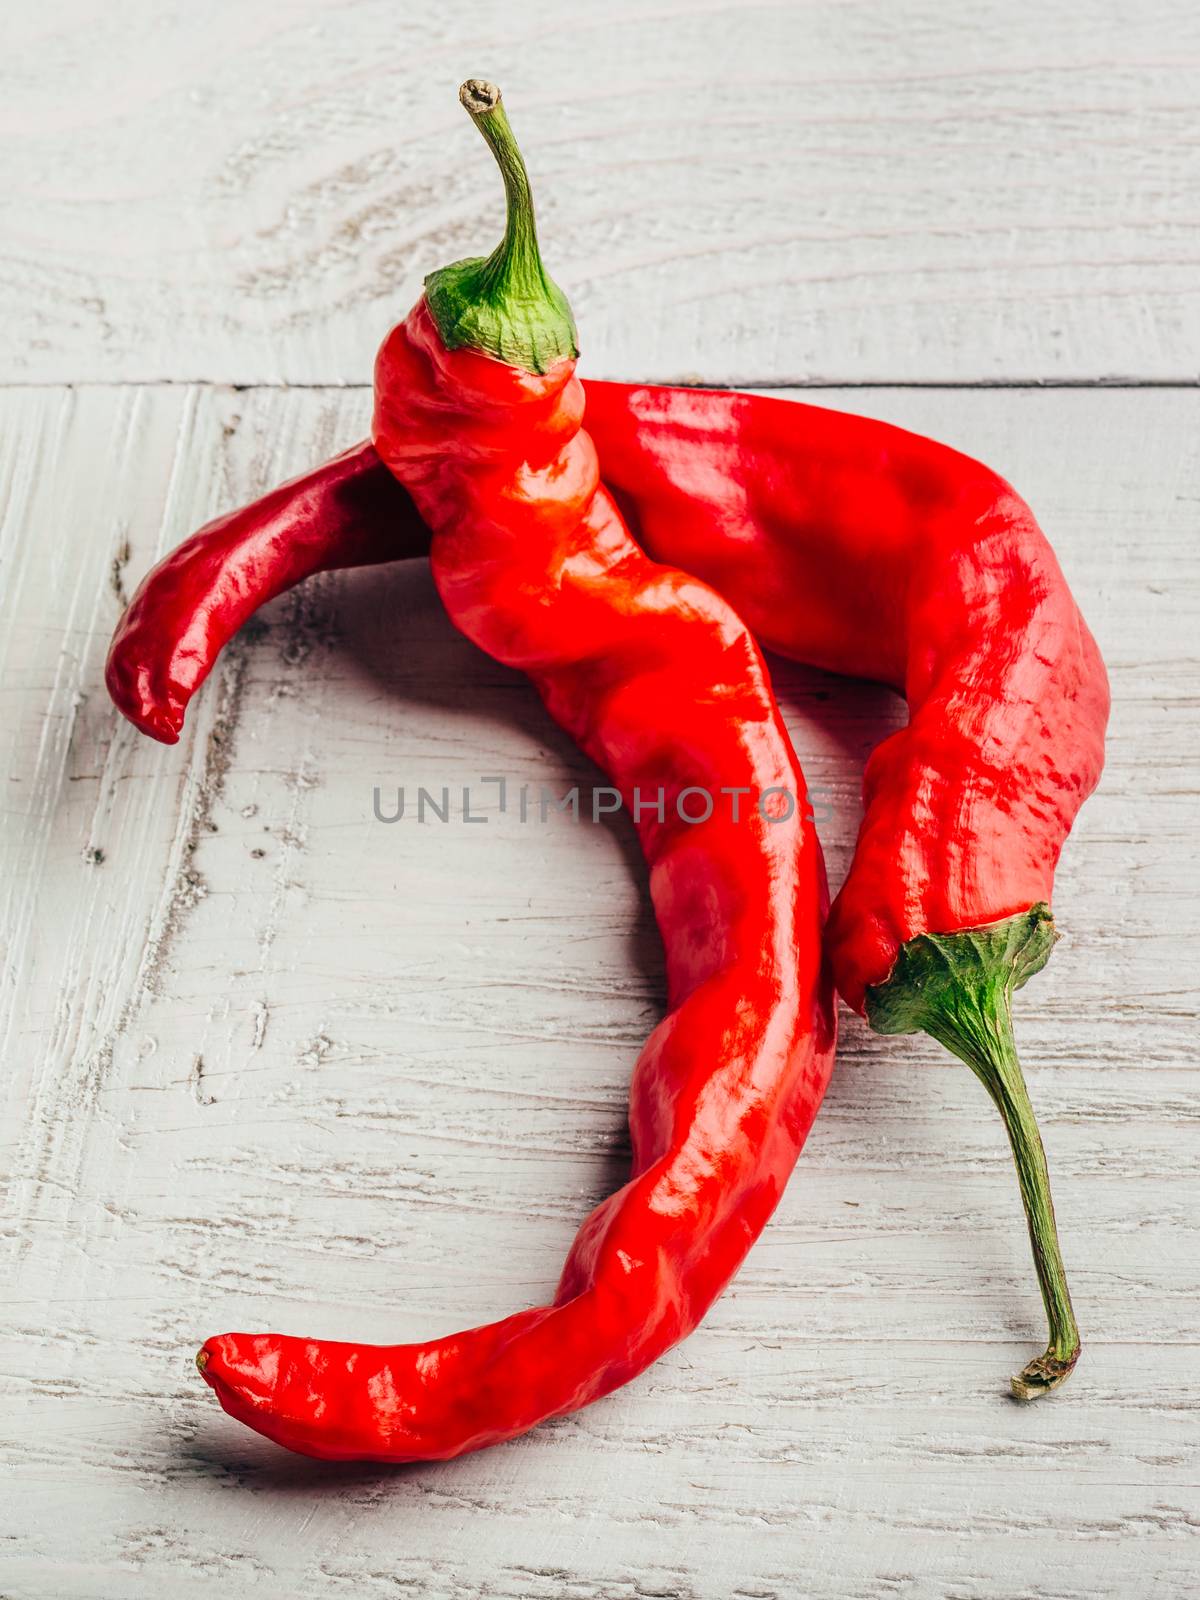 Two fresh chili peppers over white wooden background.